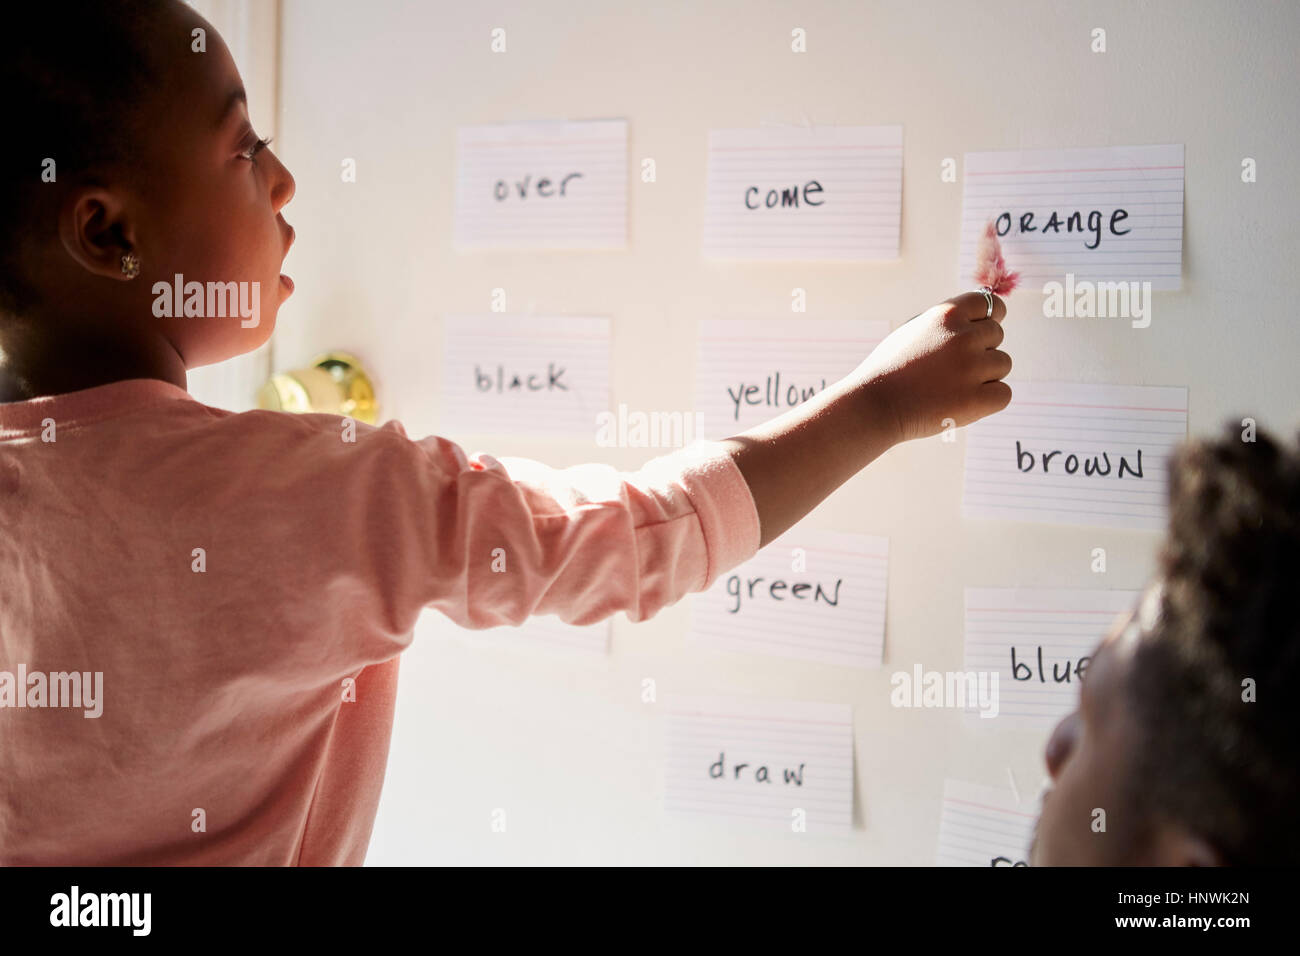 Girl with father pointing at words on wall Stock Photo